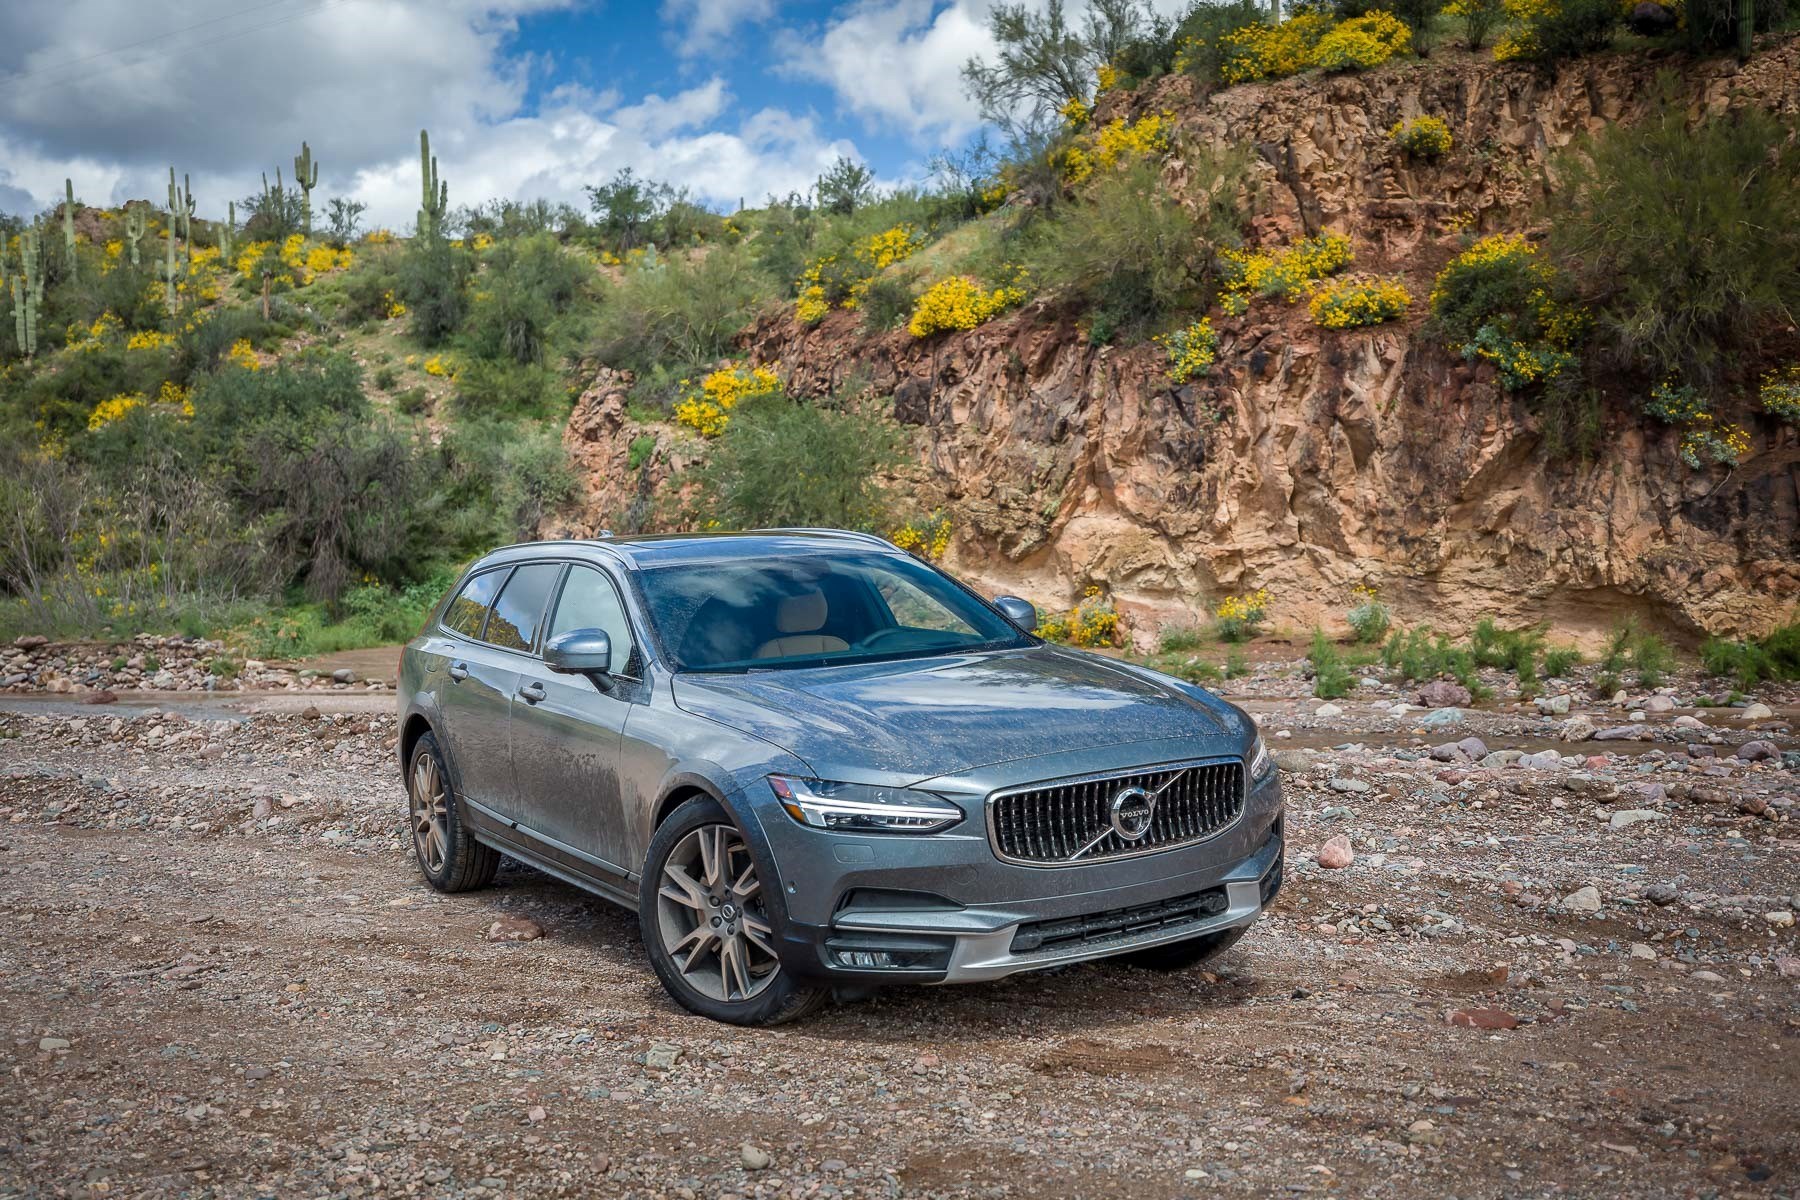 A grey Volvo V90 parked near the forest.